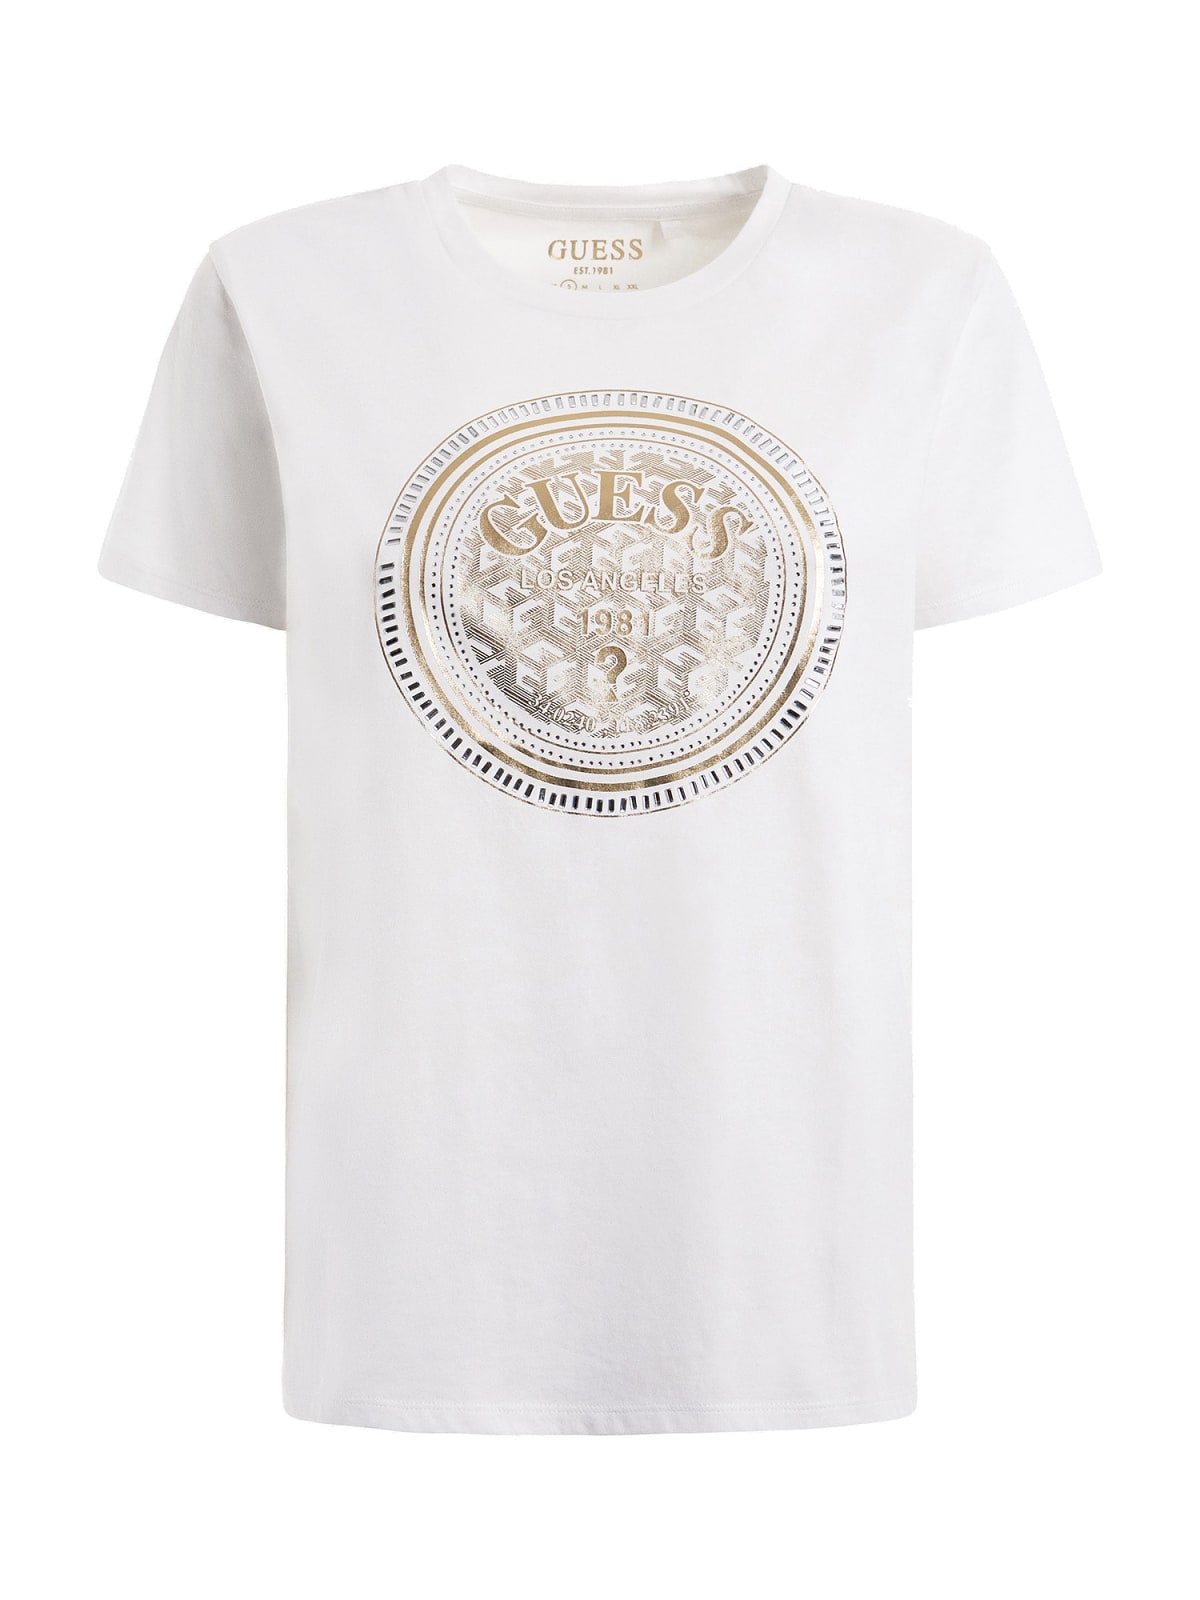 SS GUESS WATCH LOGO EASY TEE